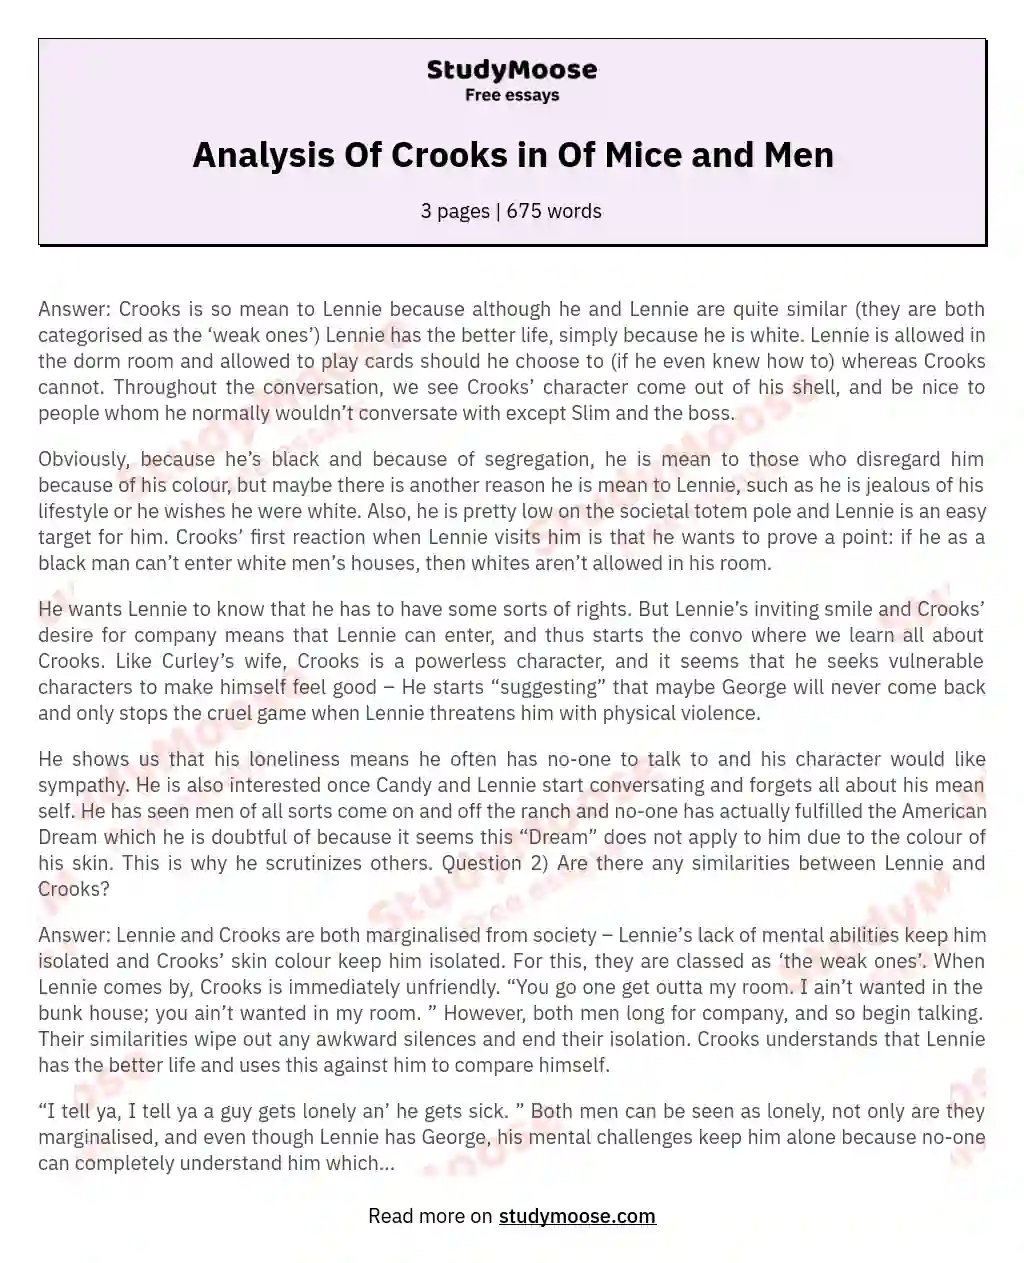 Analysis Of Crooks in Of Mice and Men essay